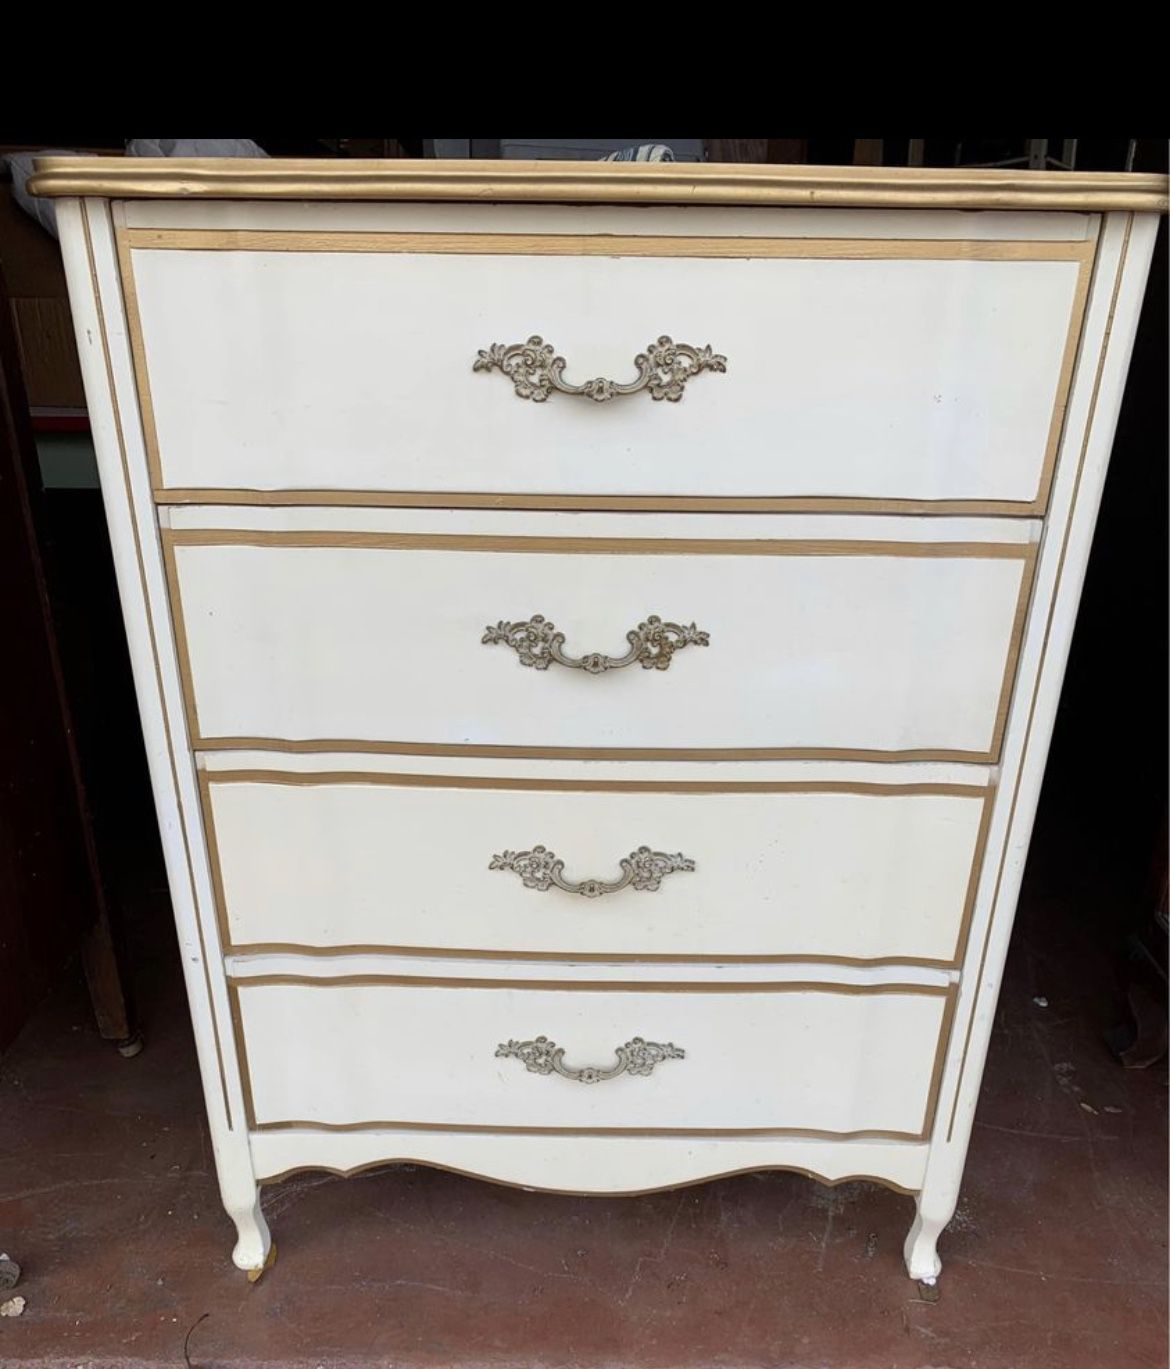 Vintage solid wood antique white French provincial dresser chest of drawers